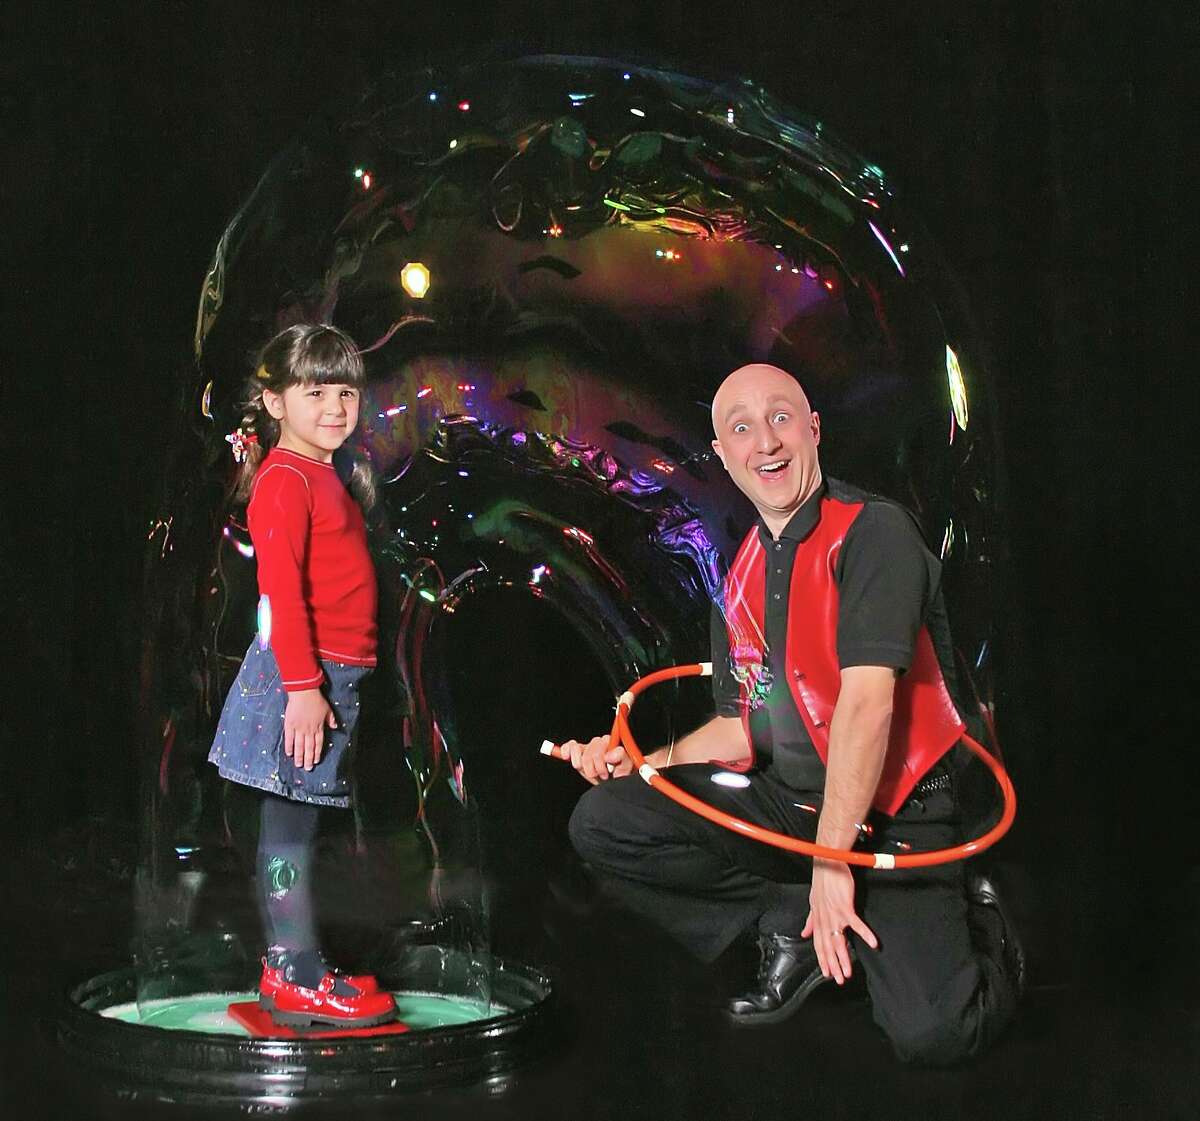 Casey Carle brings “Bubblemania” to Stamford’s Palace Theatre Dec. 29.